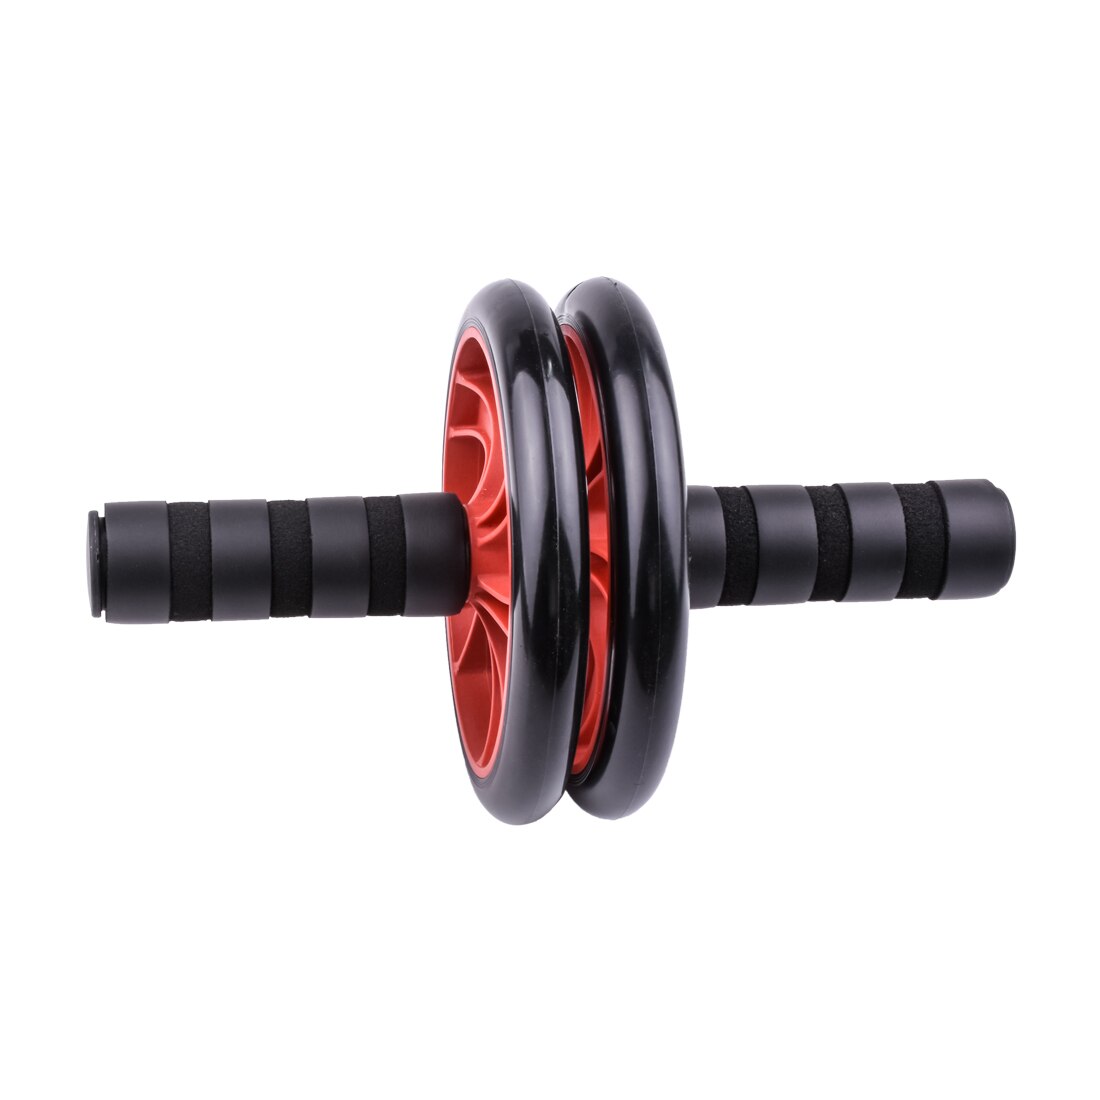 Push-up Bar AB Power Wheels Roller Machine Jump Rope Exercise Rack Workout Home Gym Fitness Equipment Abdominal Muscle Trainer